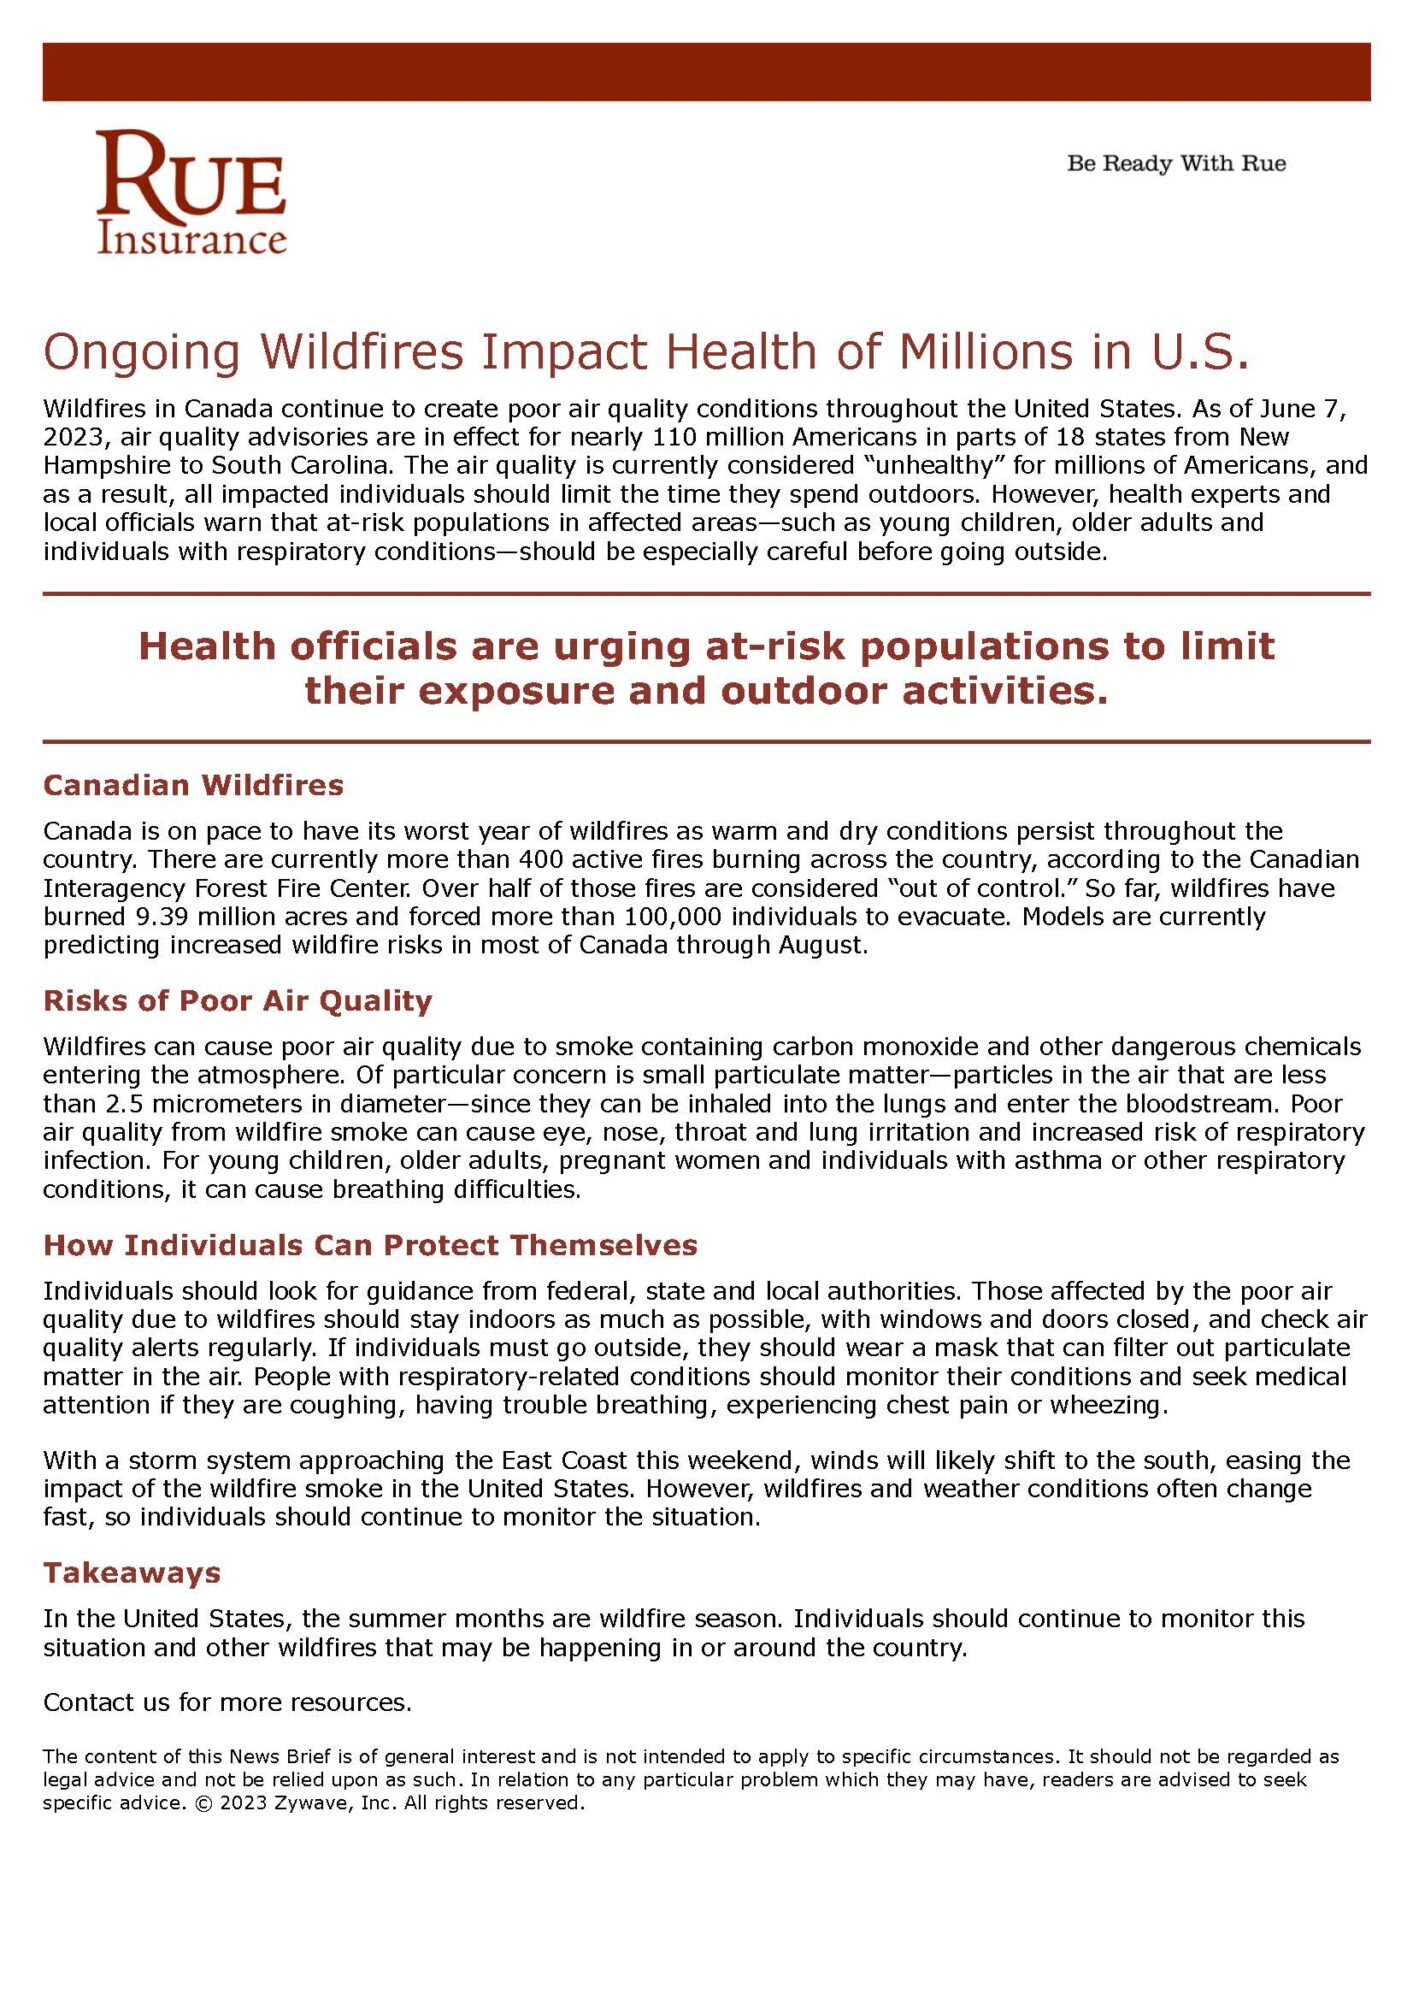 Ongoing Wildfires Impact Health of Millions